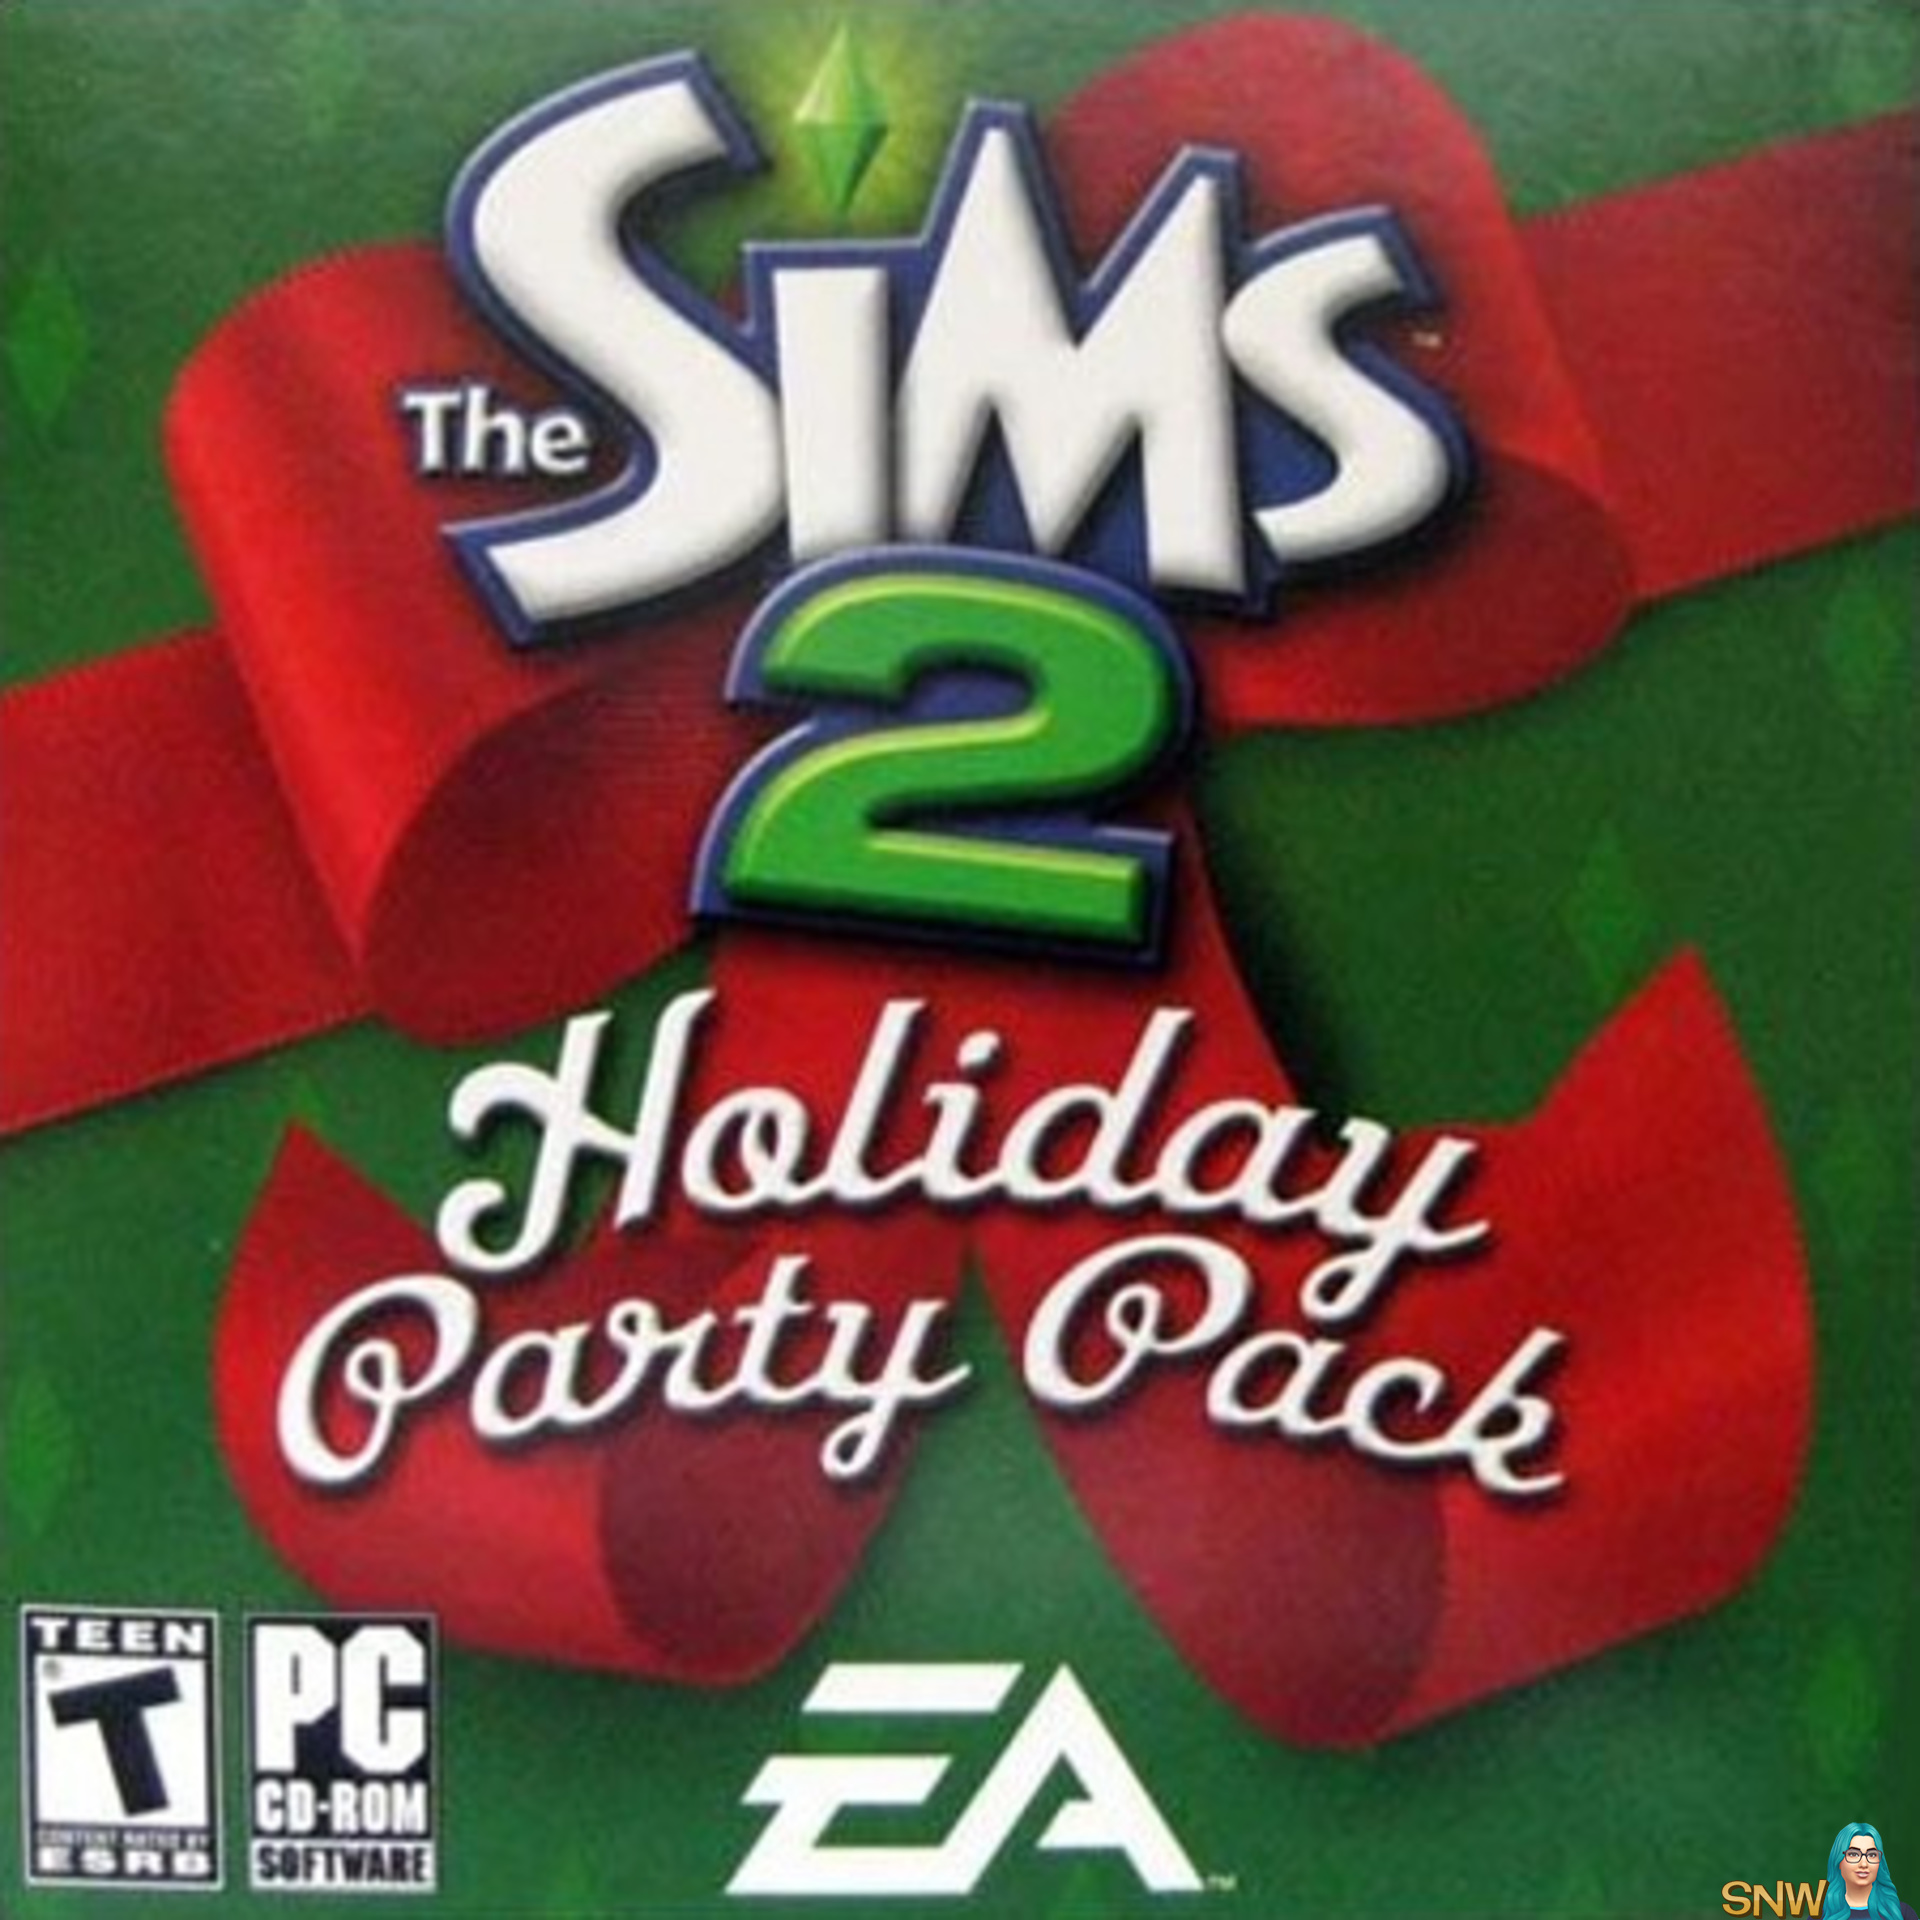 the sims 2 holiday